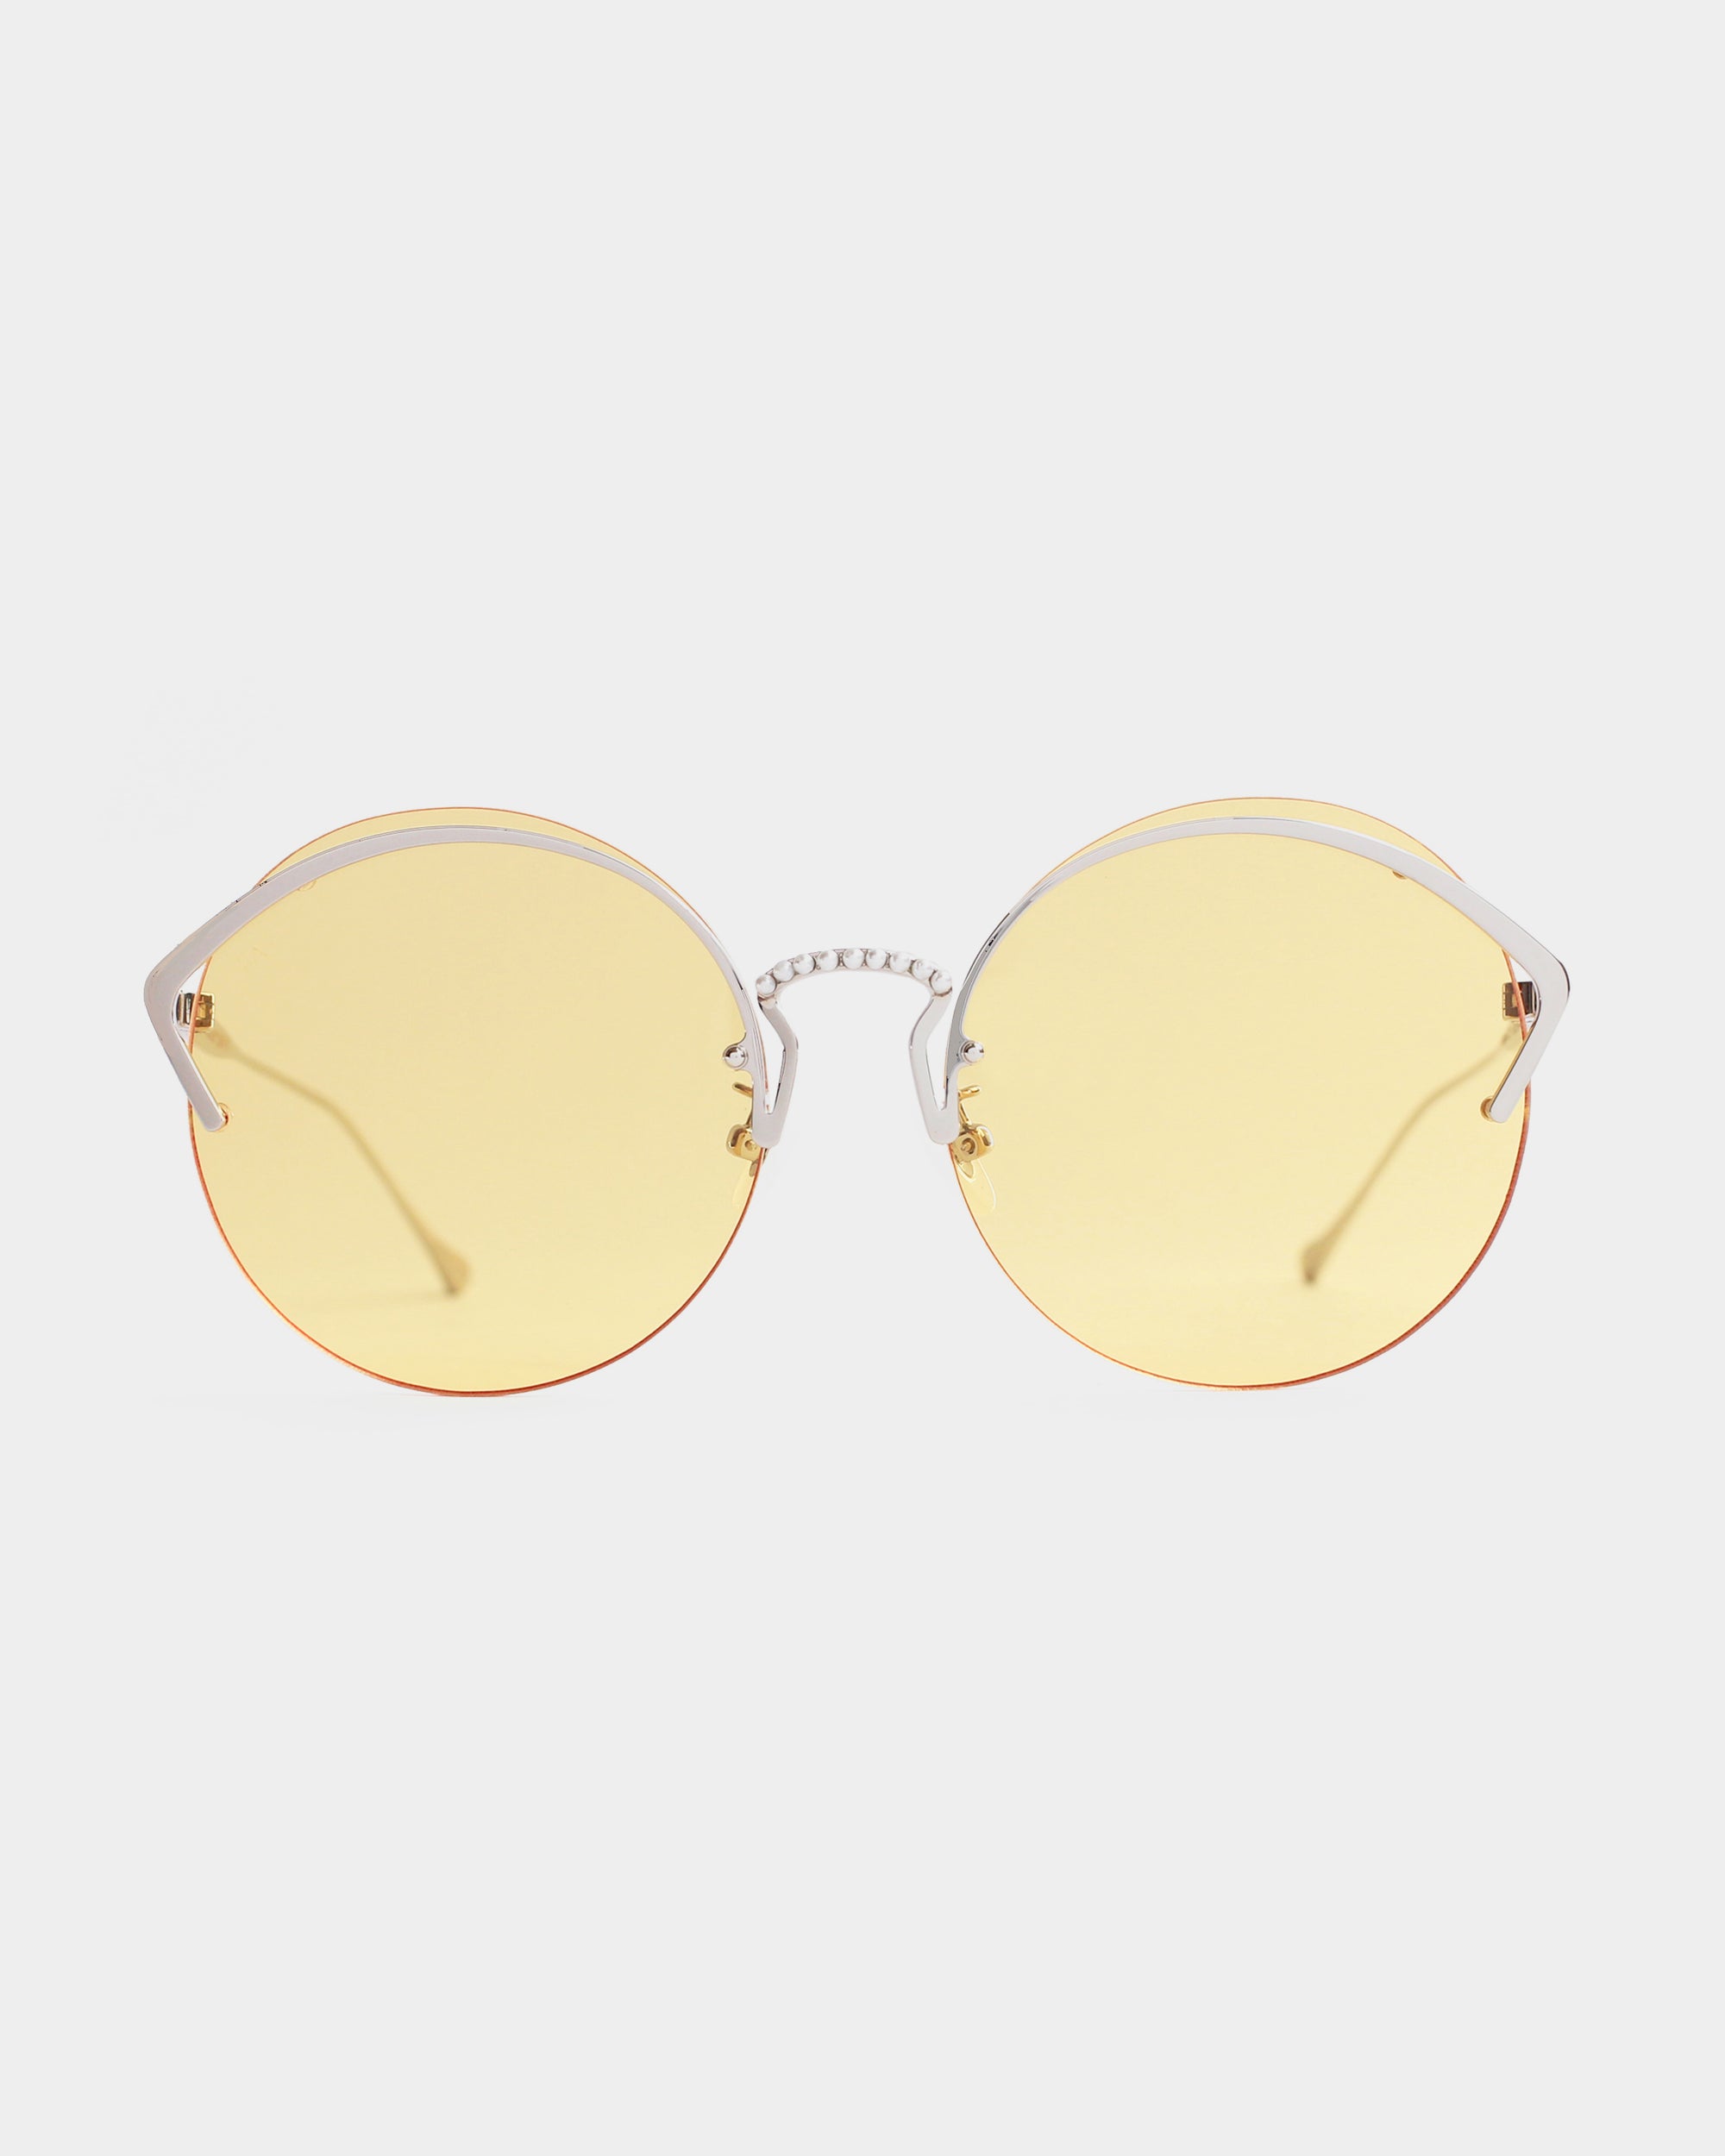 A pair of Margarita sunglasses by For Art's Sake® with yellow-tinted nylon lenses and a stainless steel frame. The sunglasses feature thin, curved temples and a unique bridge design, ensuring both UV protection and stylish appeal. The background is plain white.